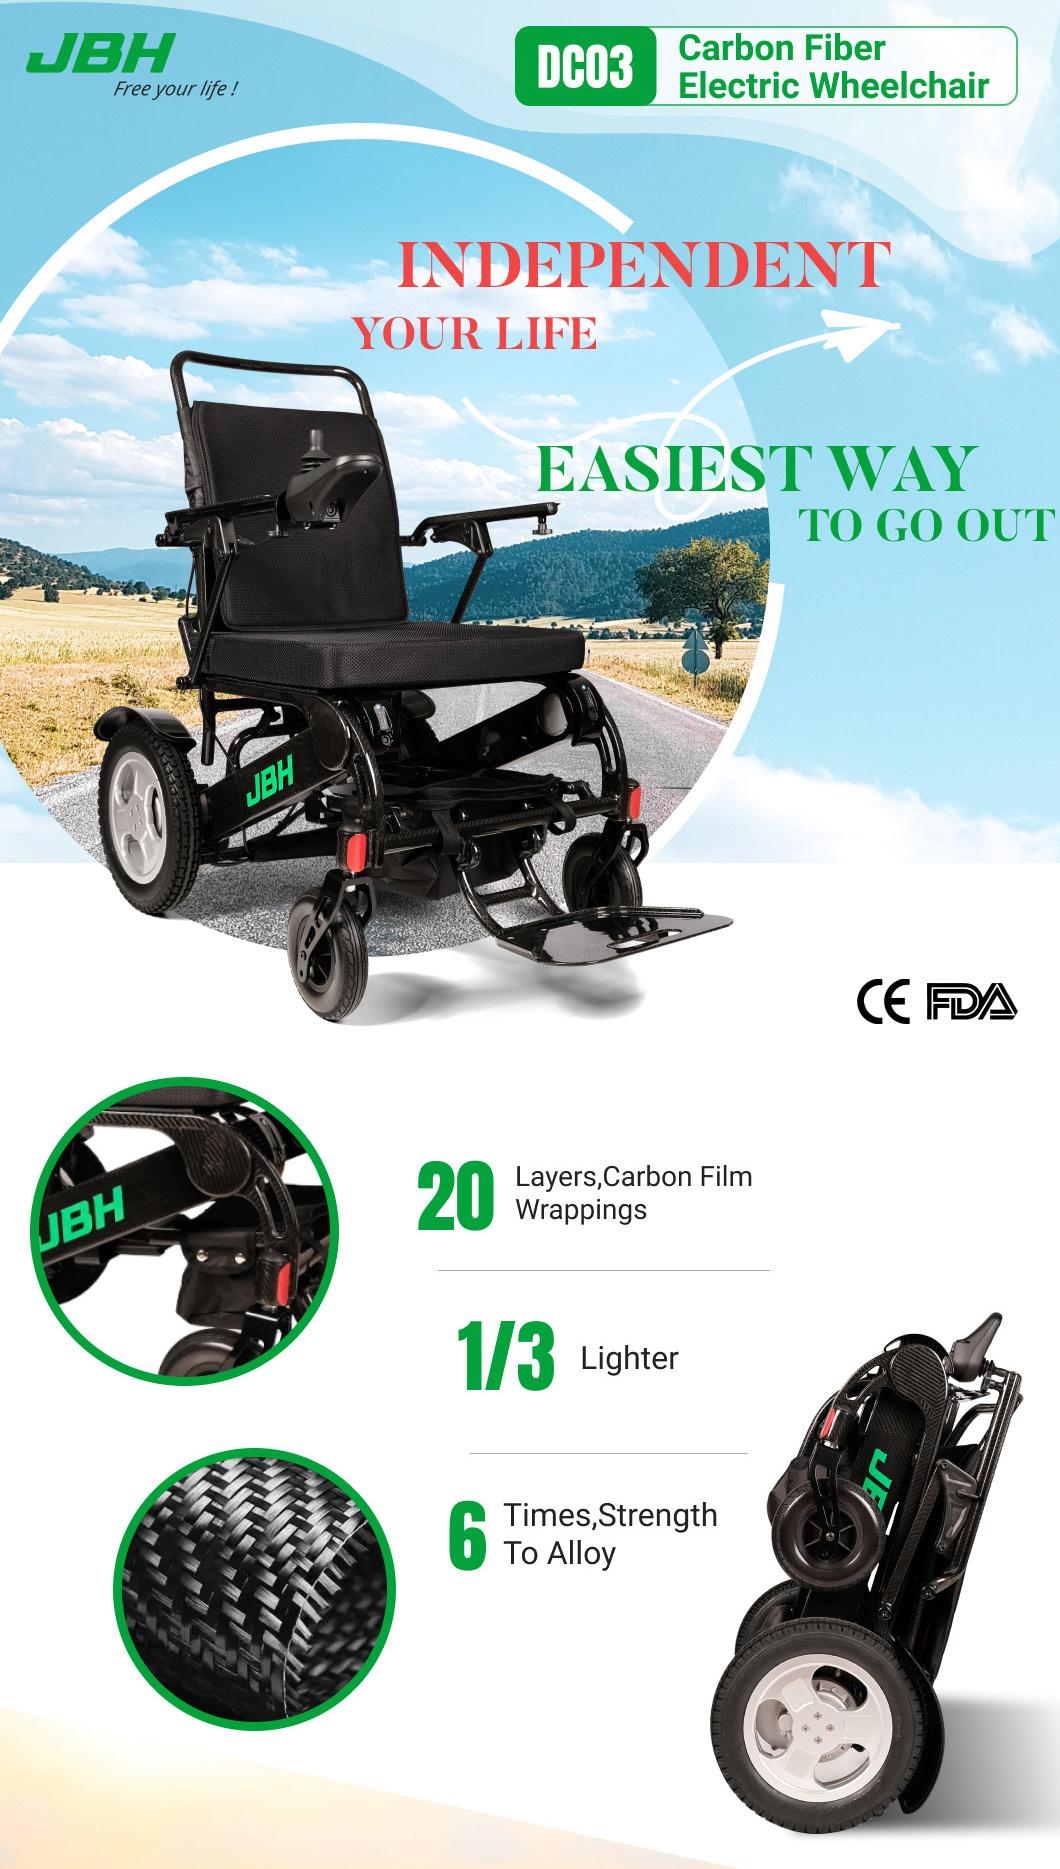 Rehabilitation Therapy Supplies Motorized Foldable Electric DC03 Carbon Fiber Wheelchair for Adults